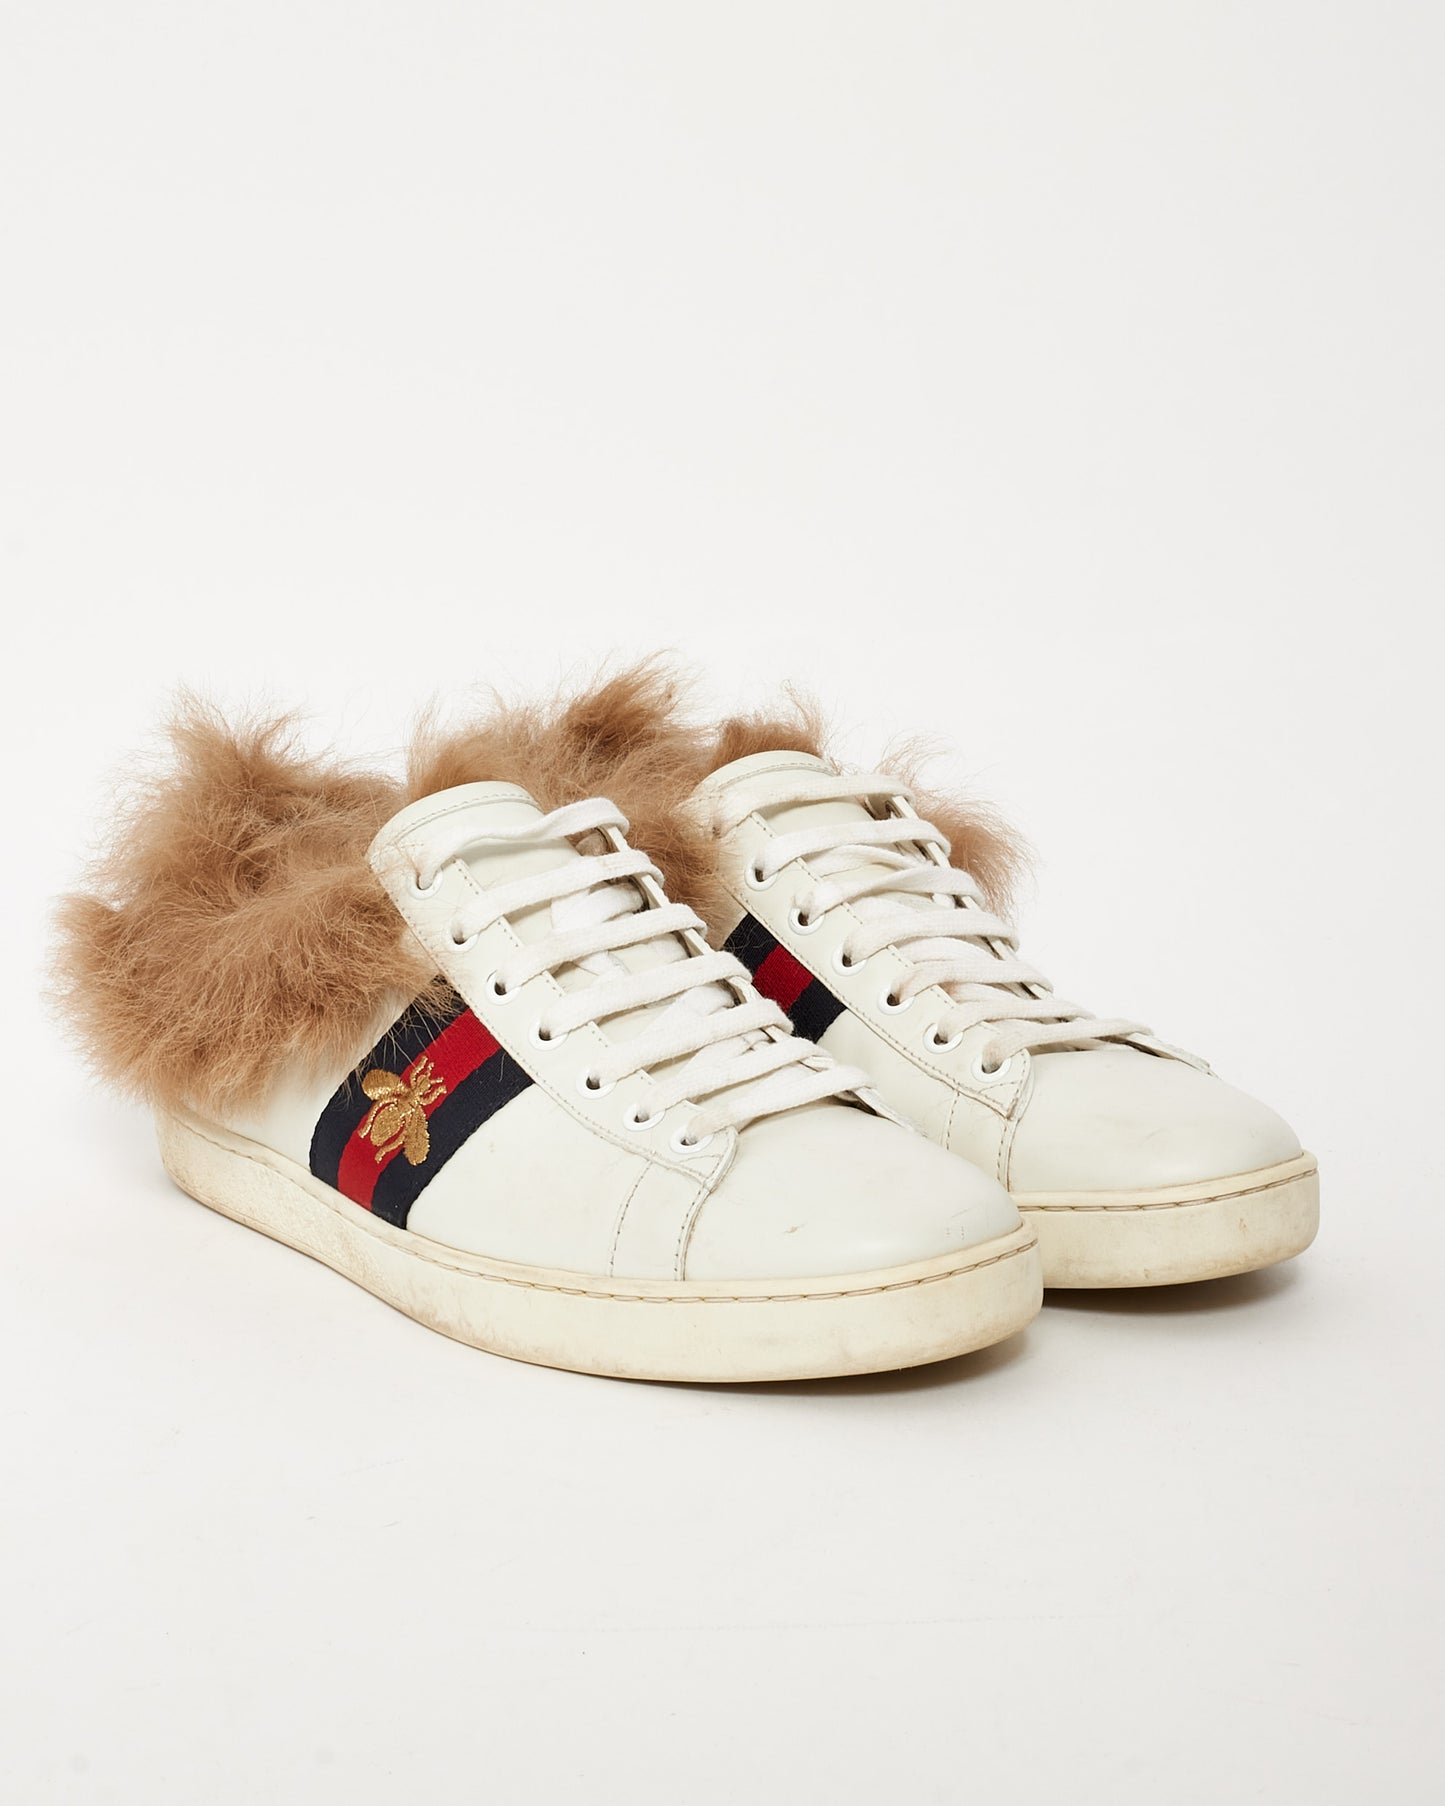 Gucci White Leather Fur Lined Ace Sneakers - 39